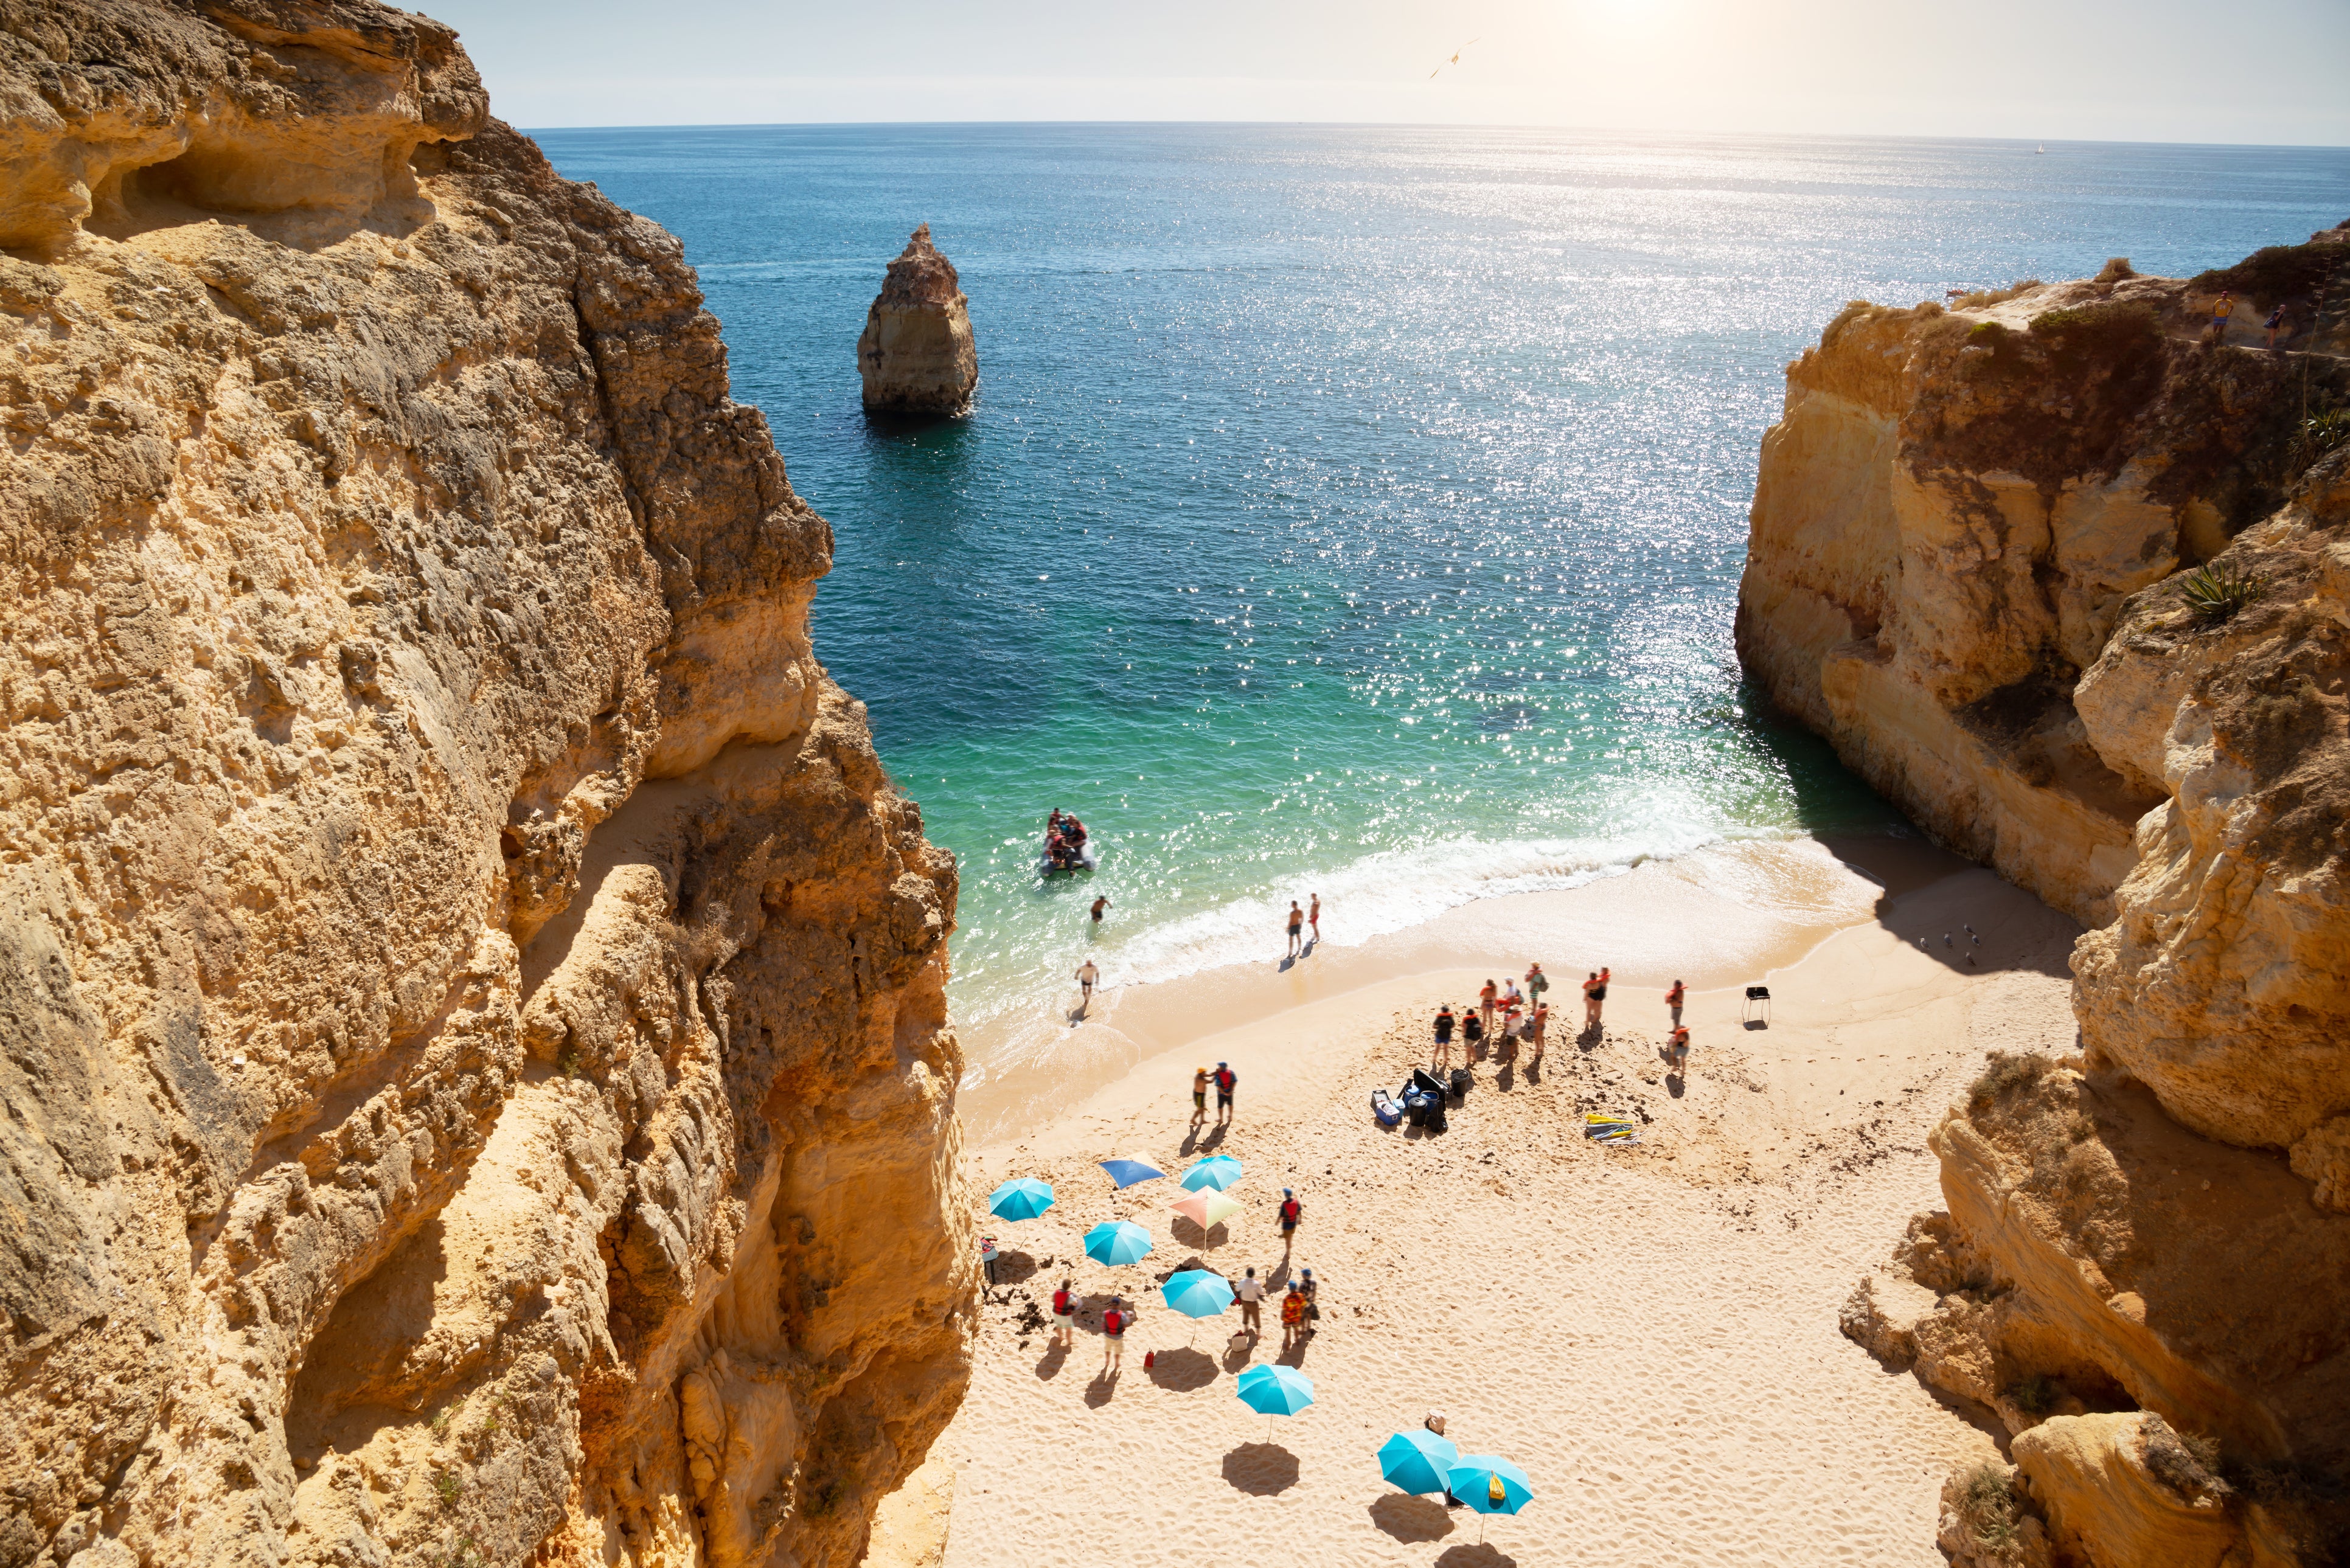 Portugal’s southernmost beaches are blessed with t-shirt weather by February